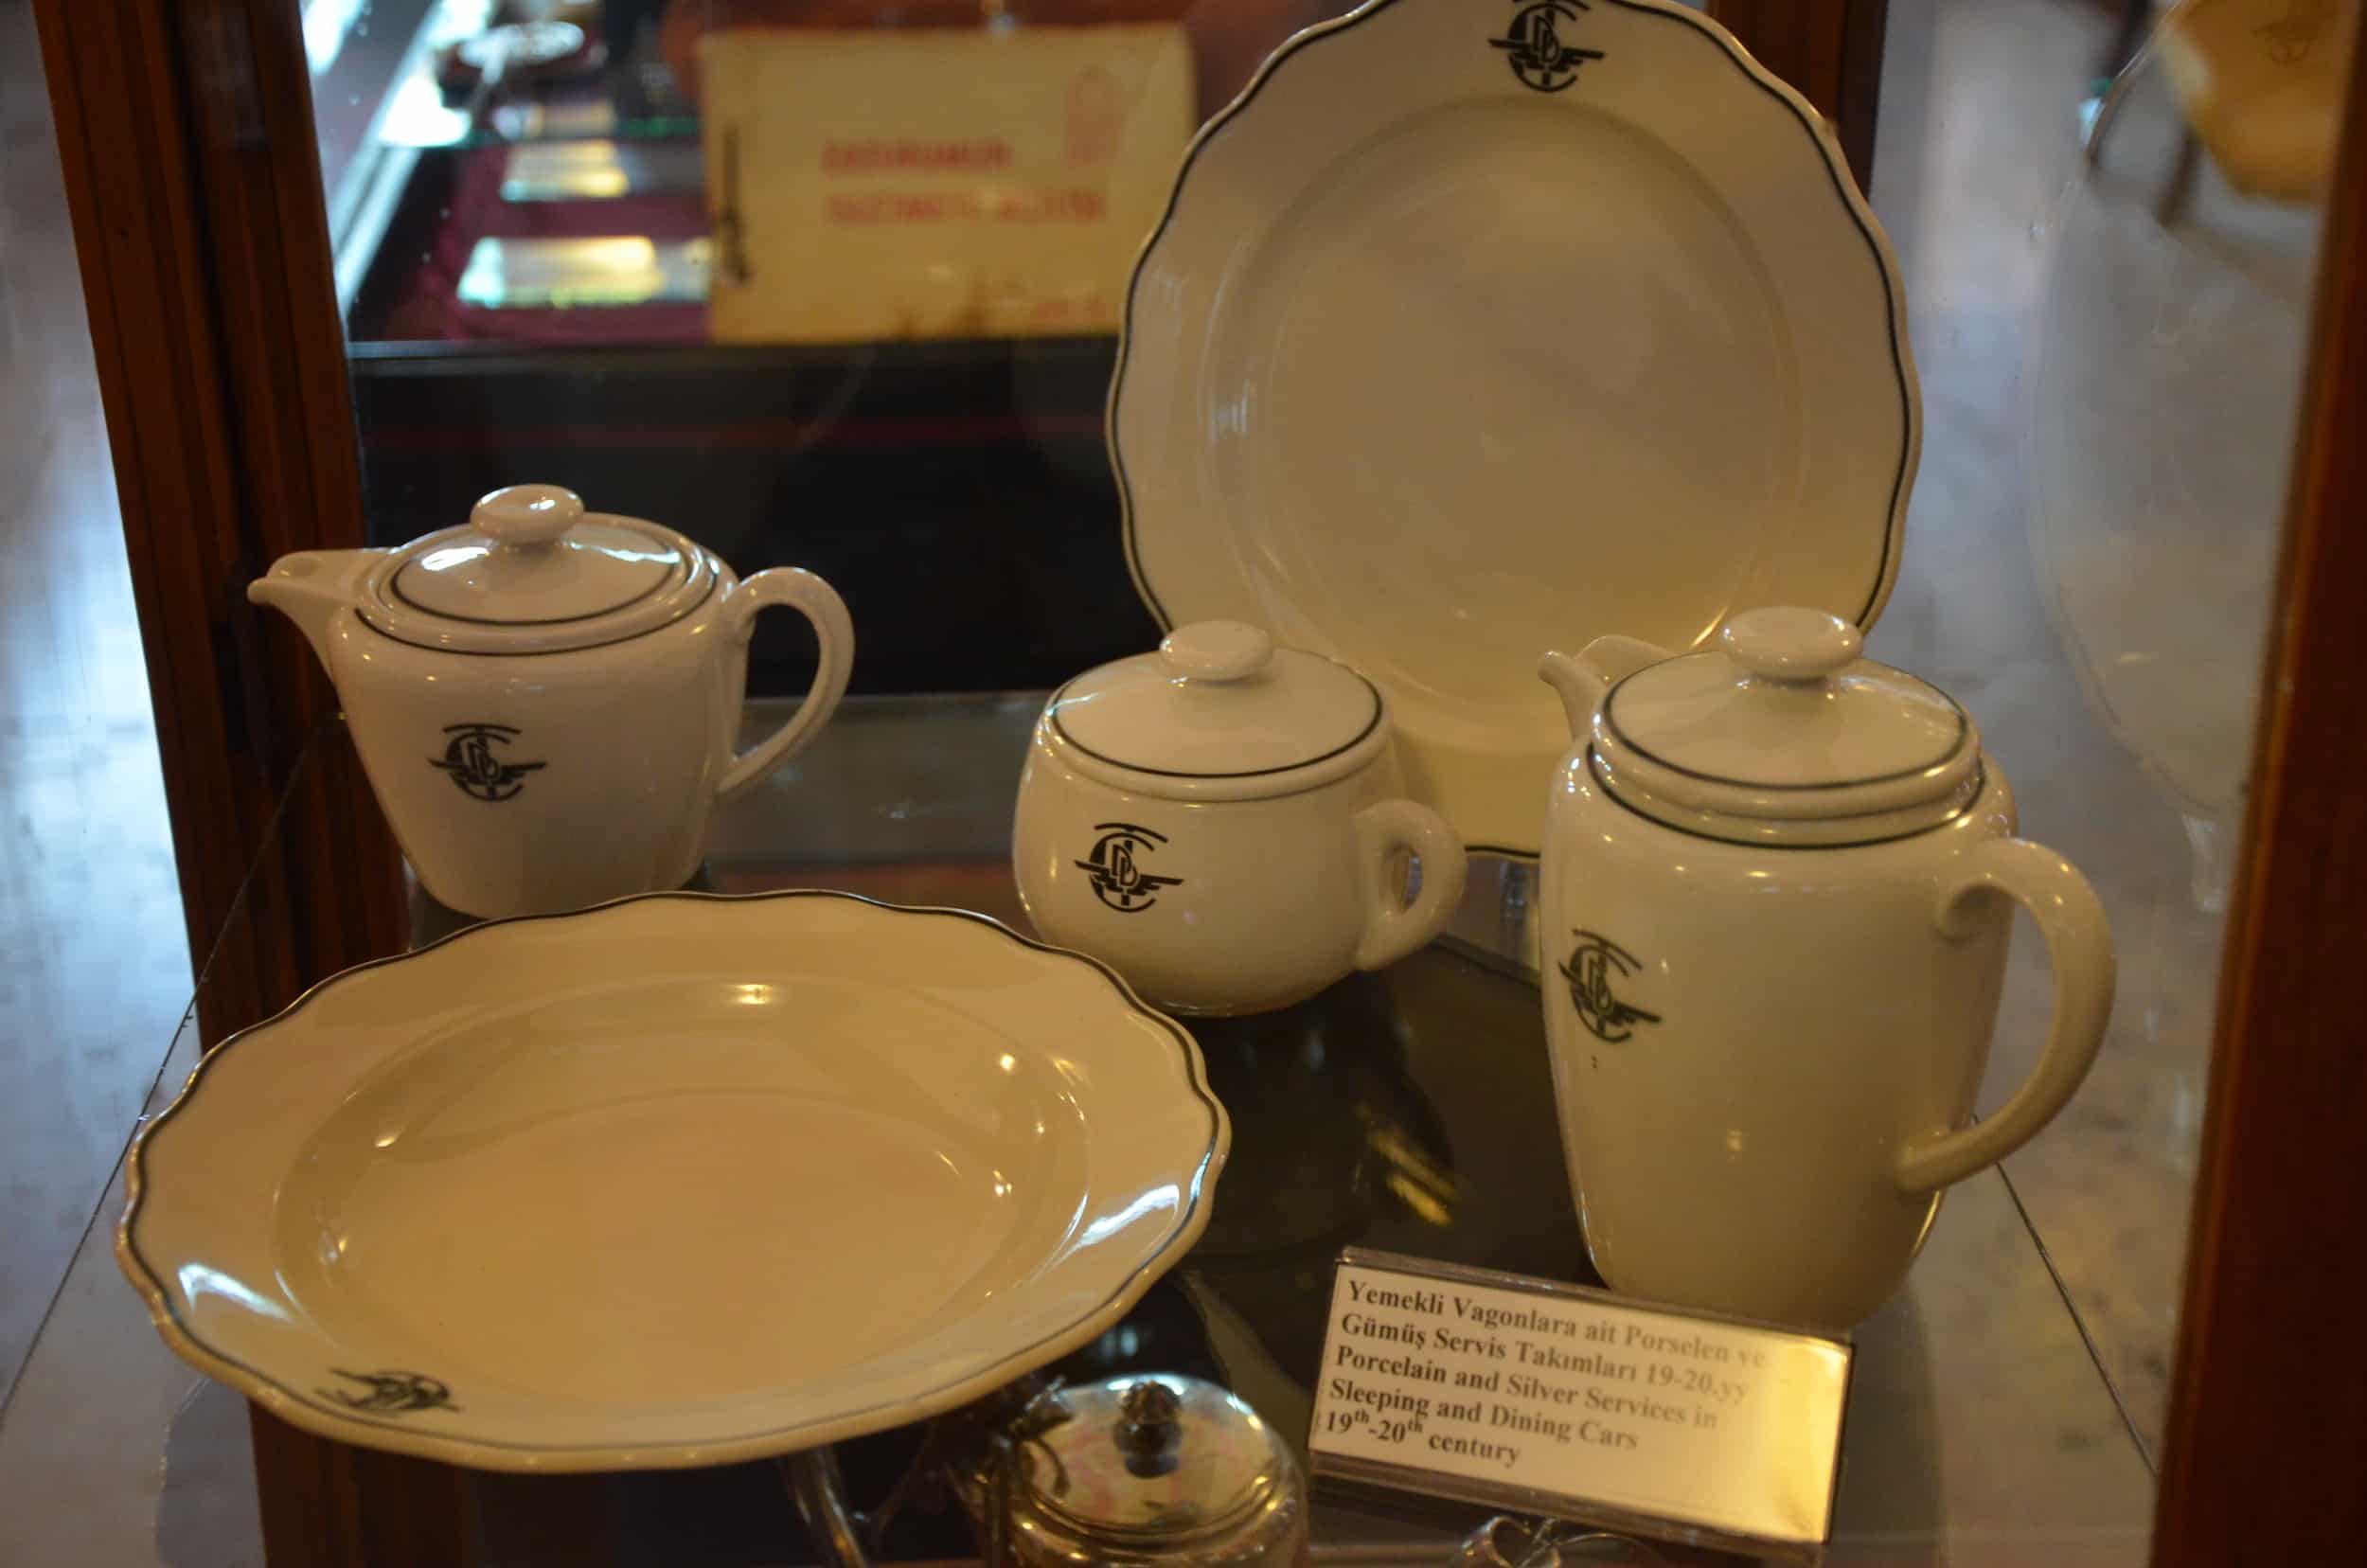 Porcelain ware at the Istanbul Railway Museum